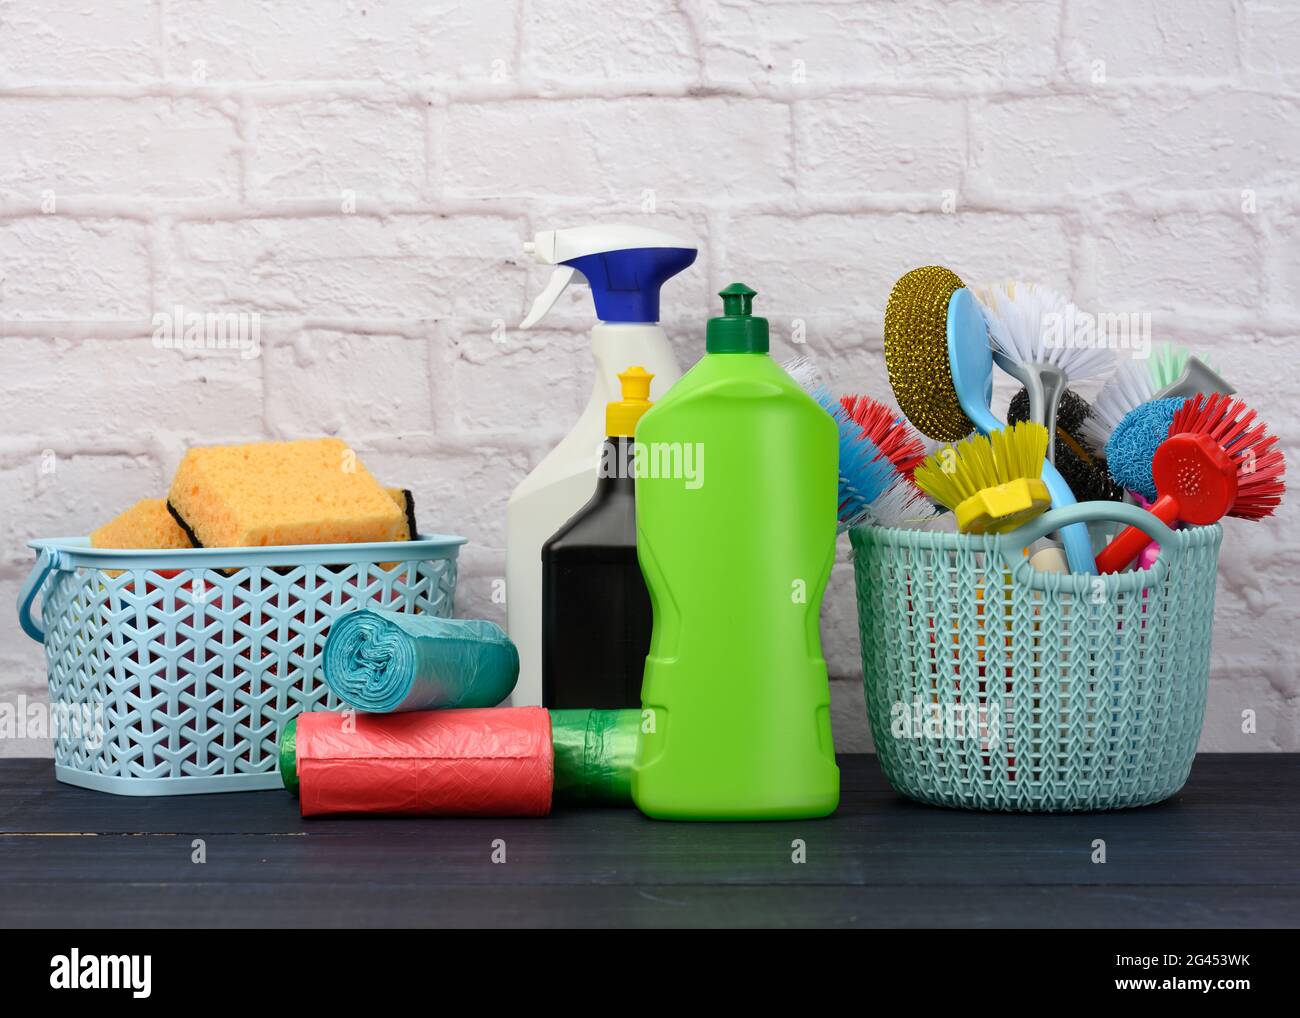 Sponges, plastic brushes and bottles of detergents on a blue wooden table. Household cleaning items Stock Photo